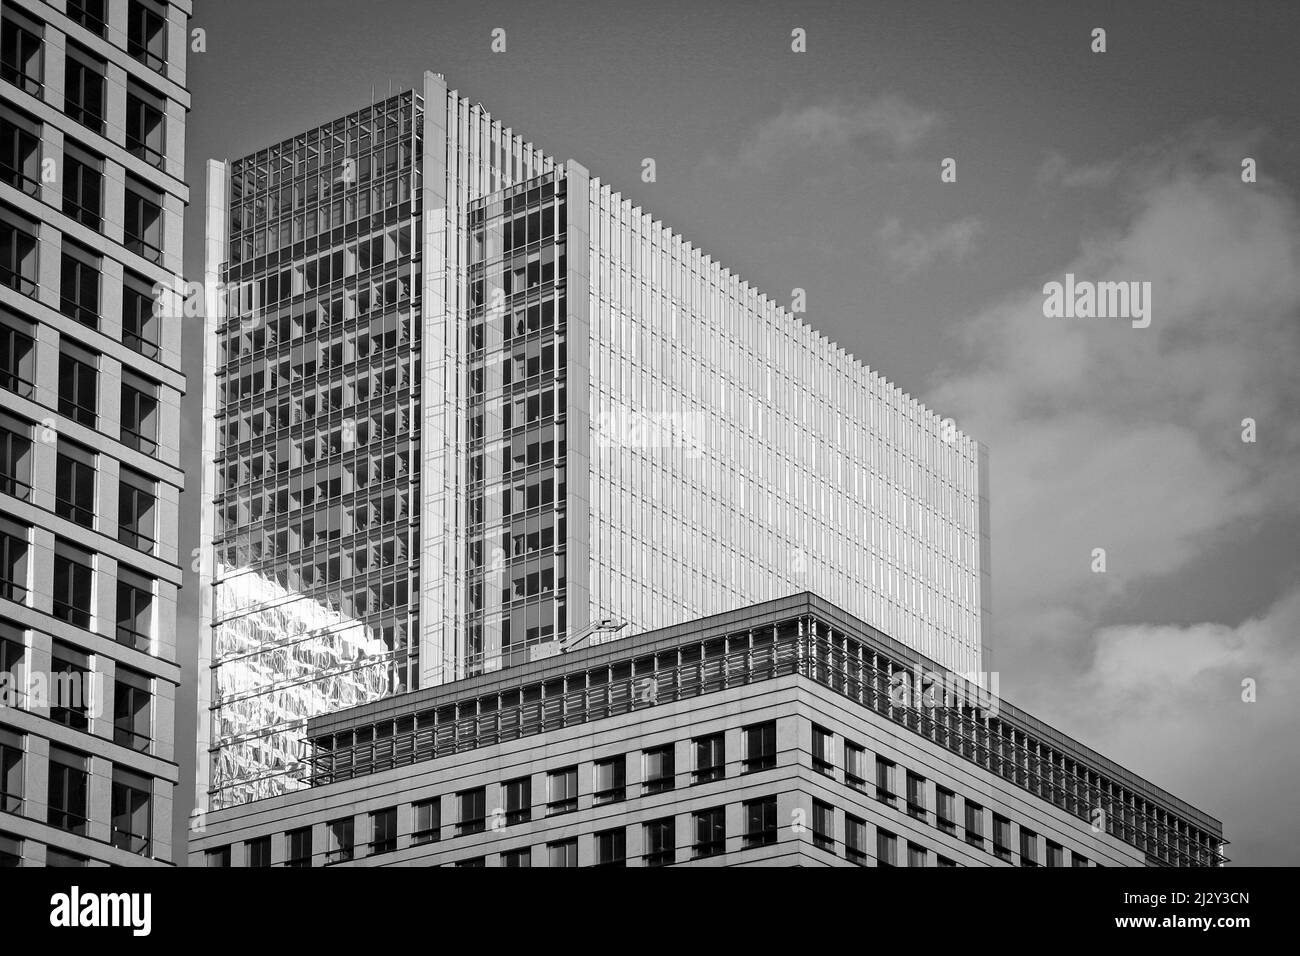 Abstract, full-frame modern business buildings.  Black and white with film grain added. Stock Photo